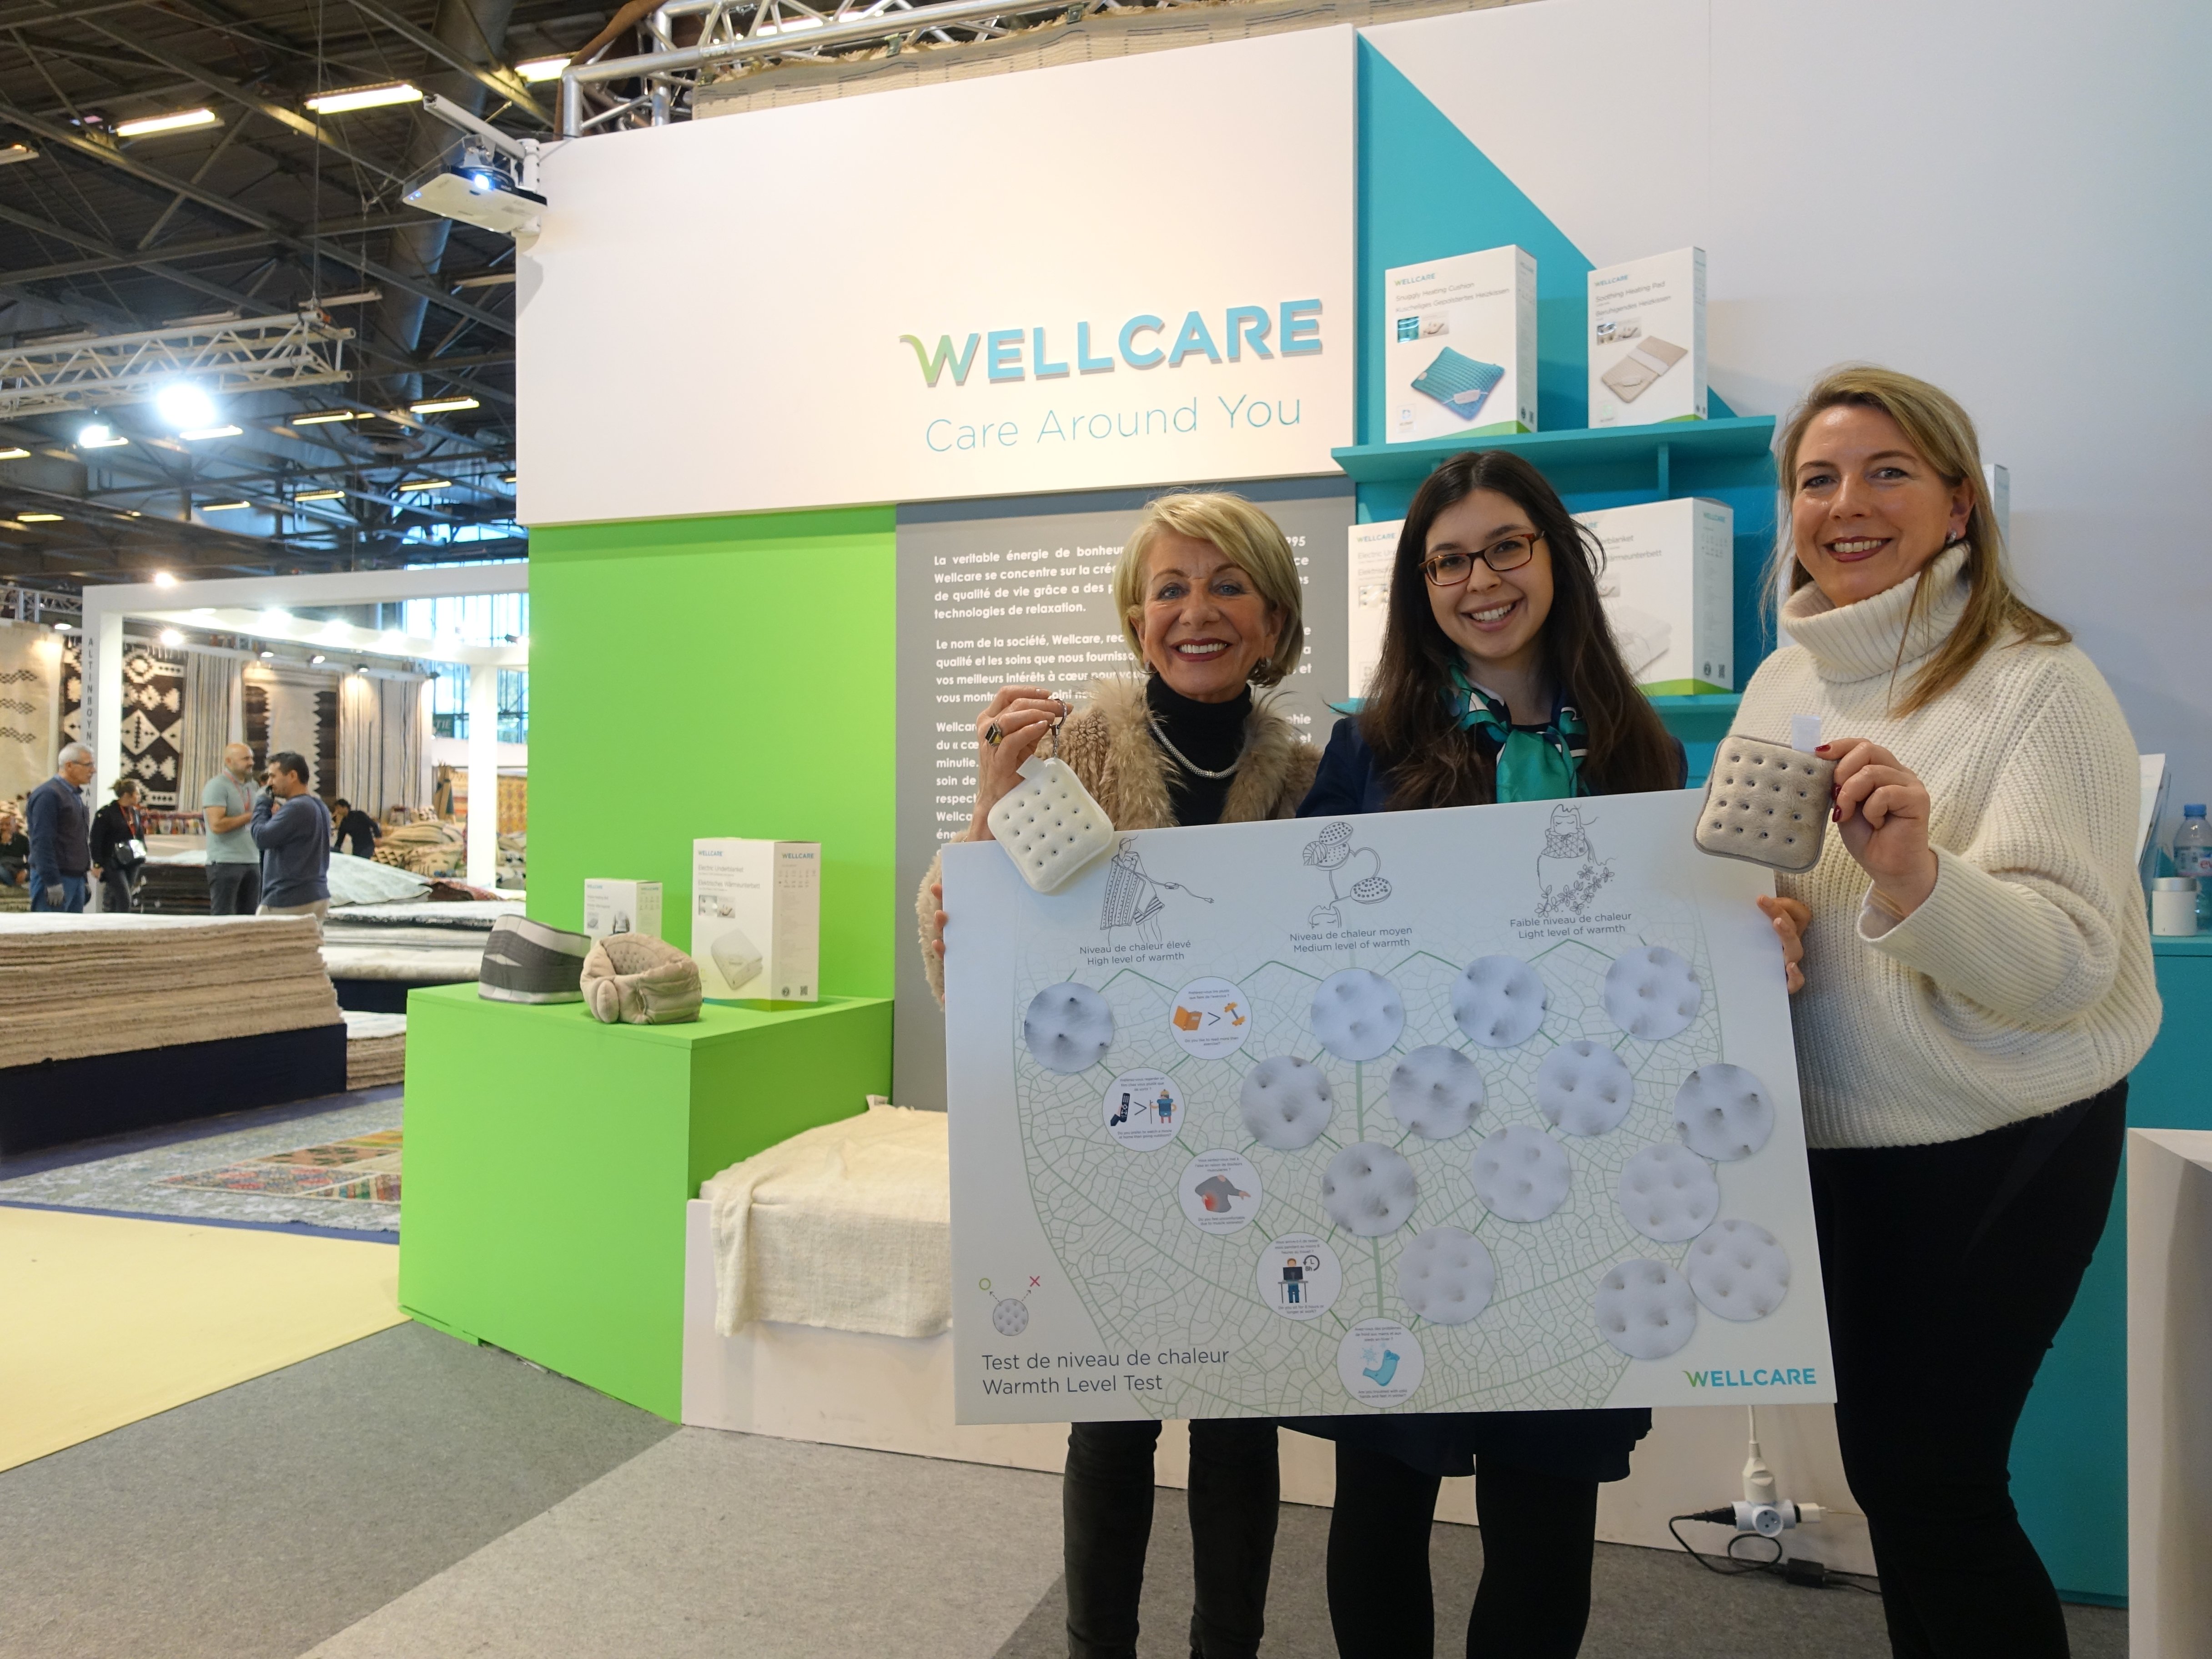 Wellcare exhibits at Maison & Objet